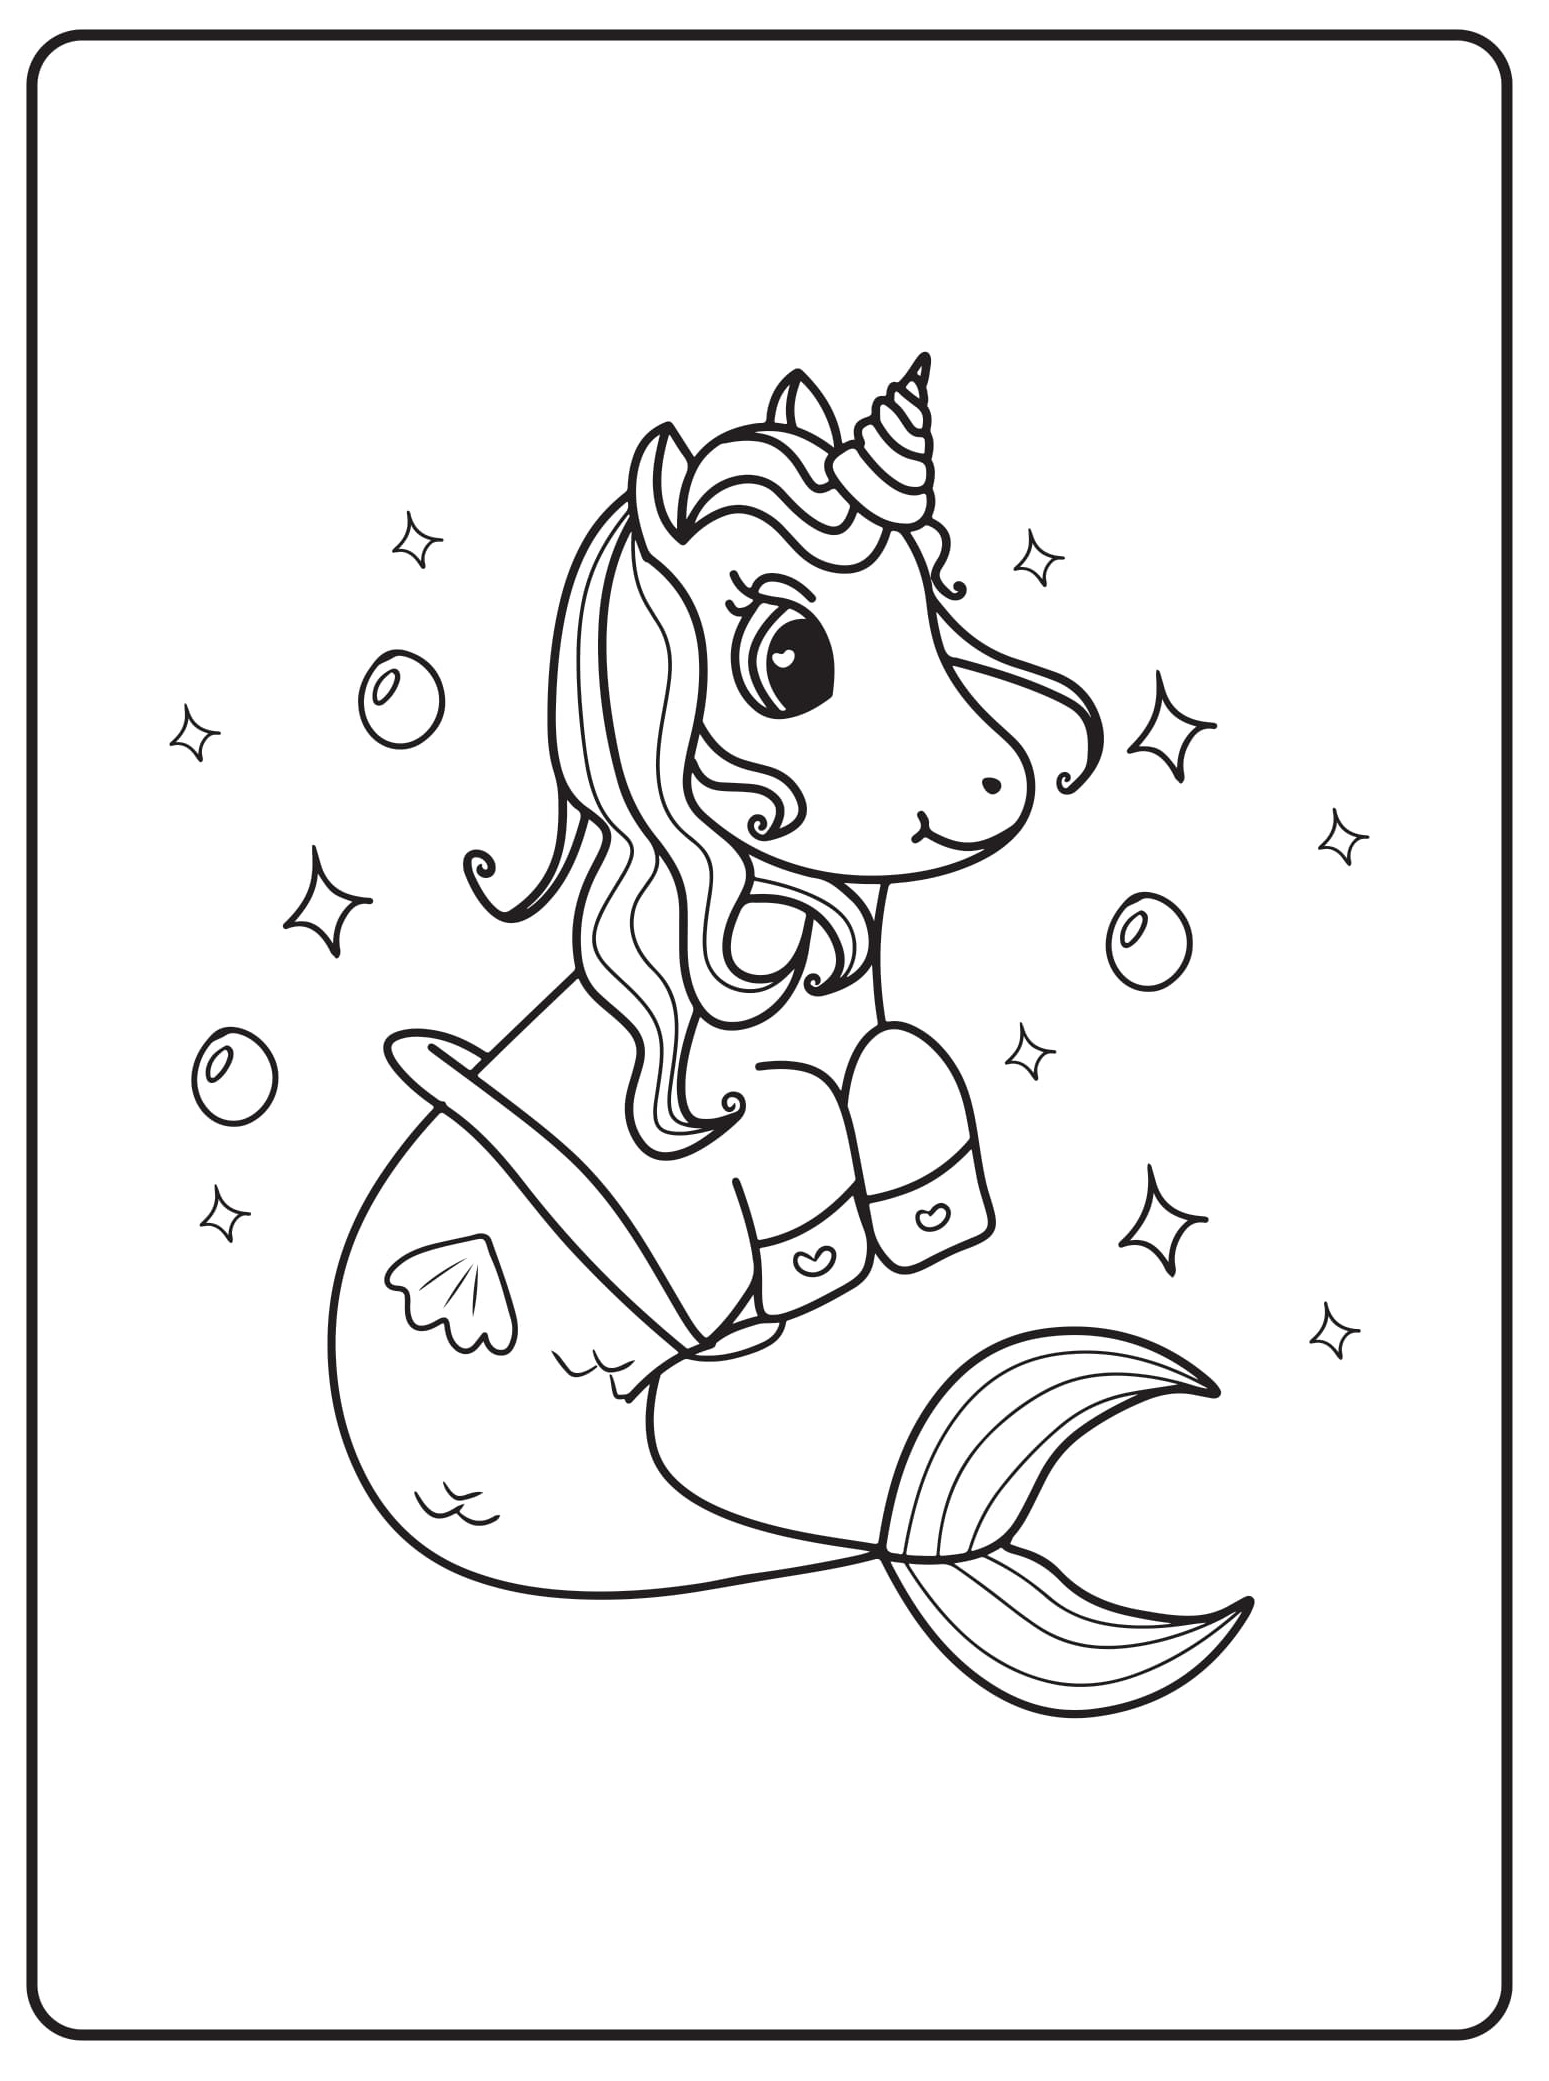 Unicorn Coloring Pages 11